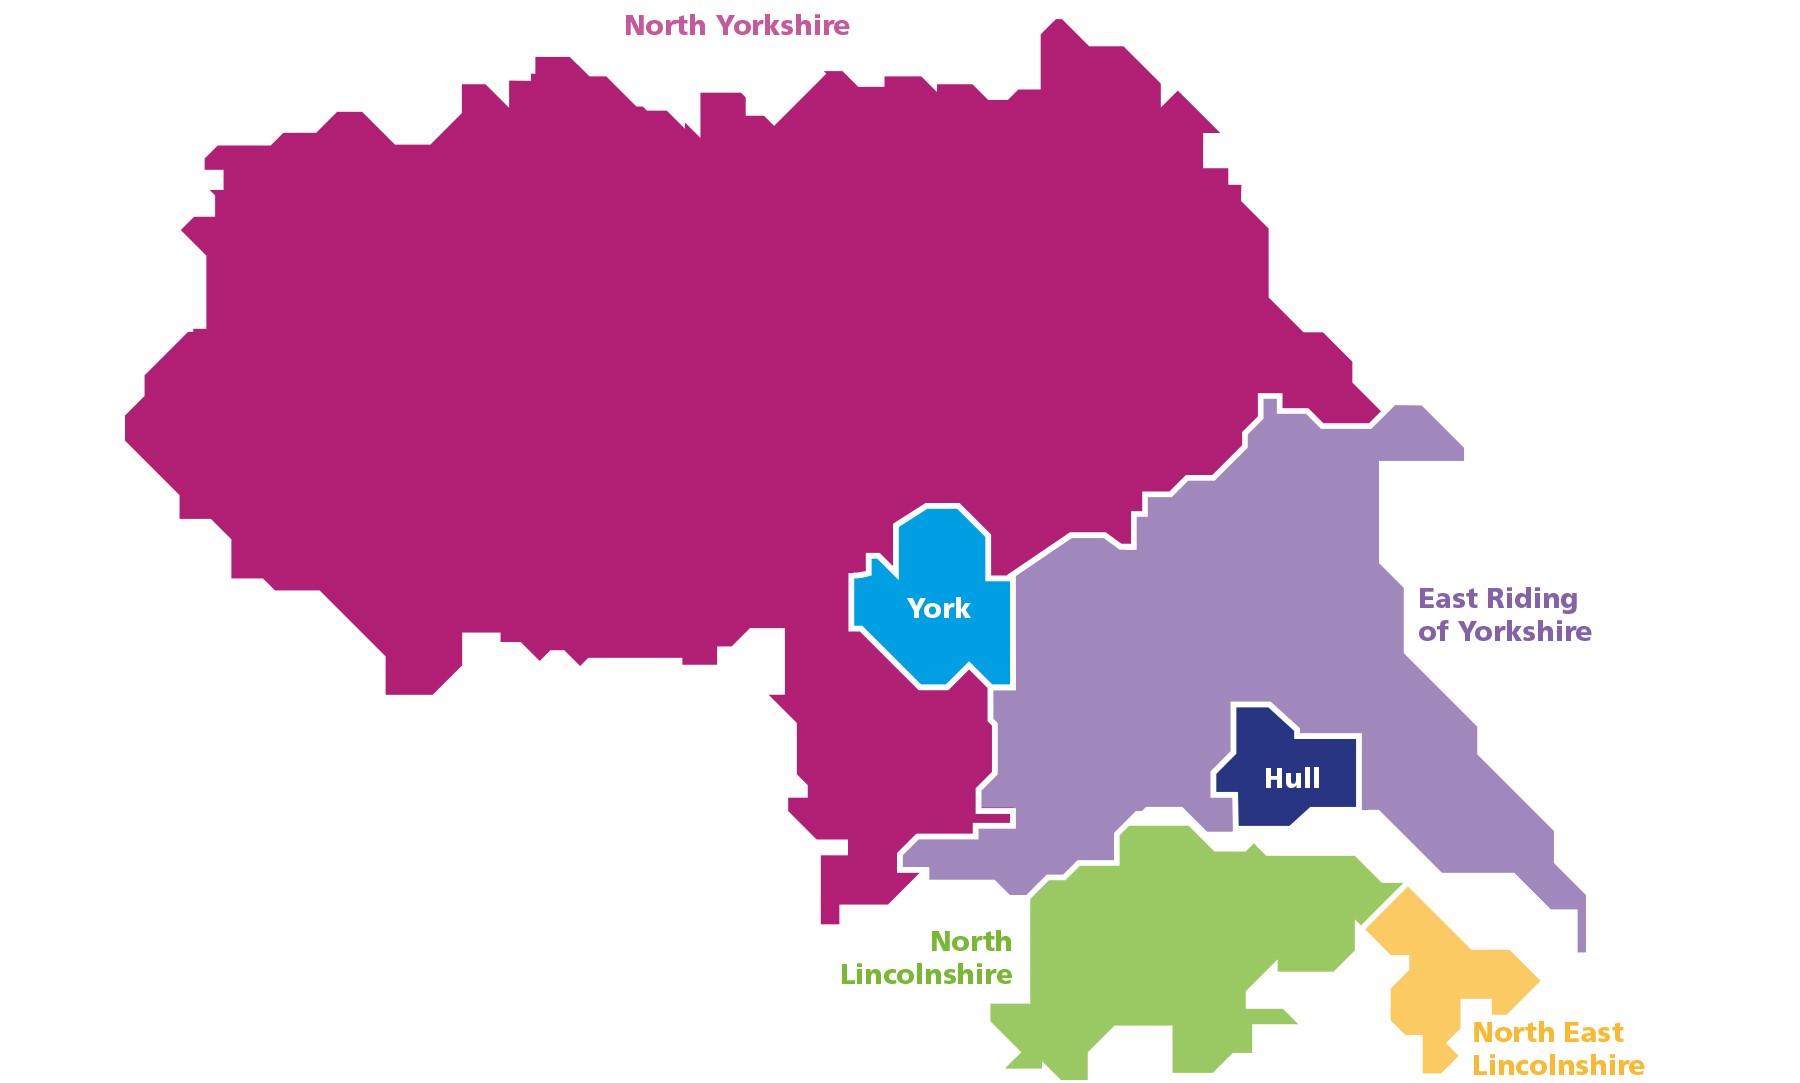 A map showing the areas covered by this website, including North East Lincolnshire, North Lincolnshire, East Riding, Hull, North Yorkshire, and York